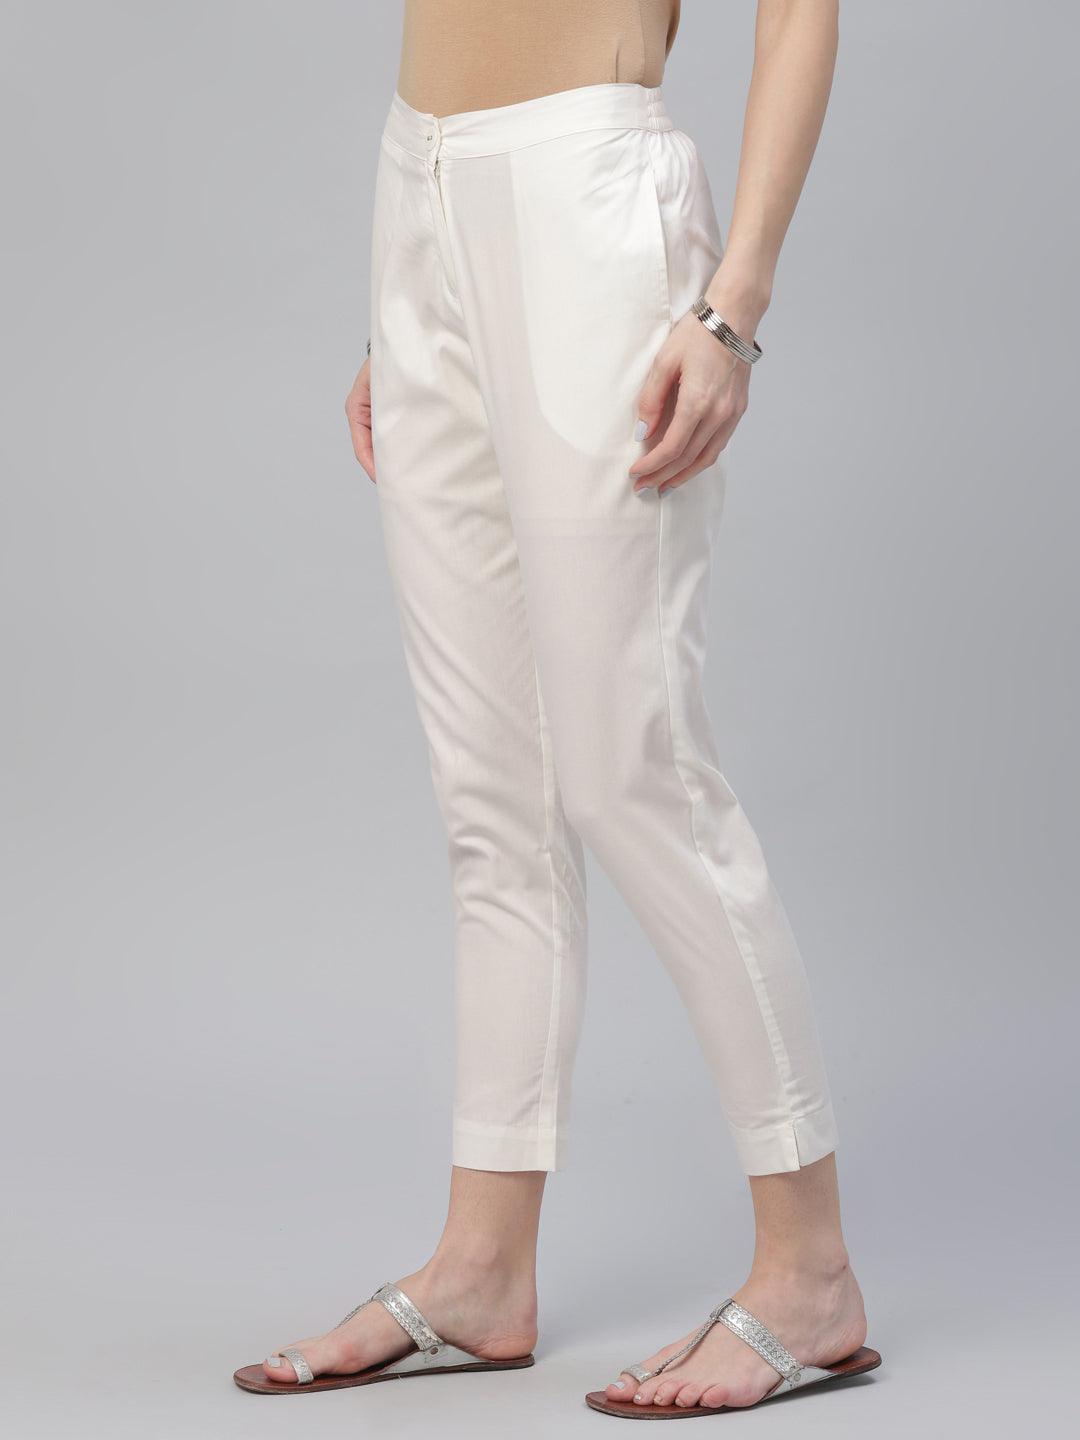 Cigarette Pants  mywellmadefashion  WELL MADE Fashion For New Generation